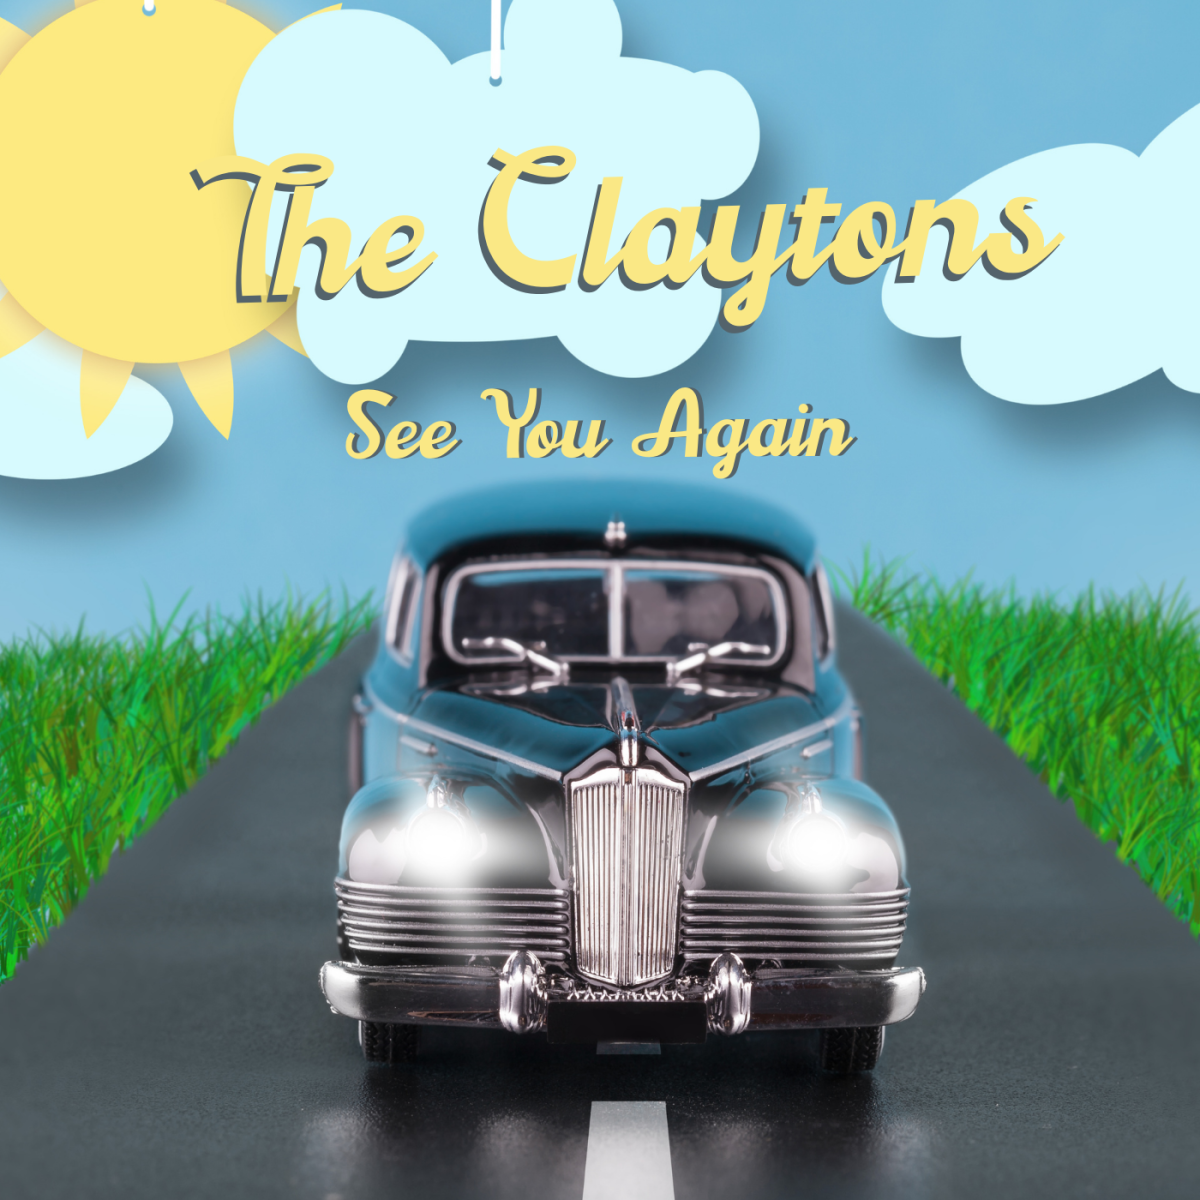 The Claytons’ “See You Again” lyric video